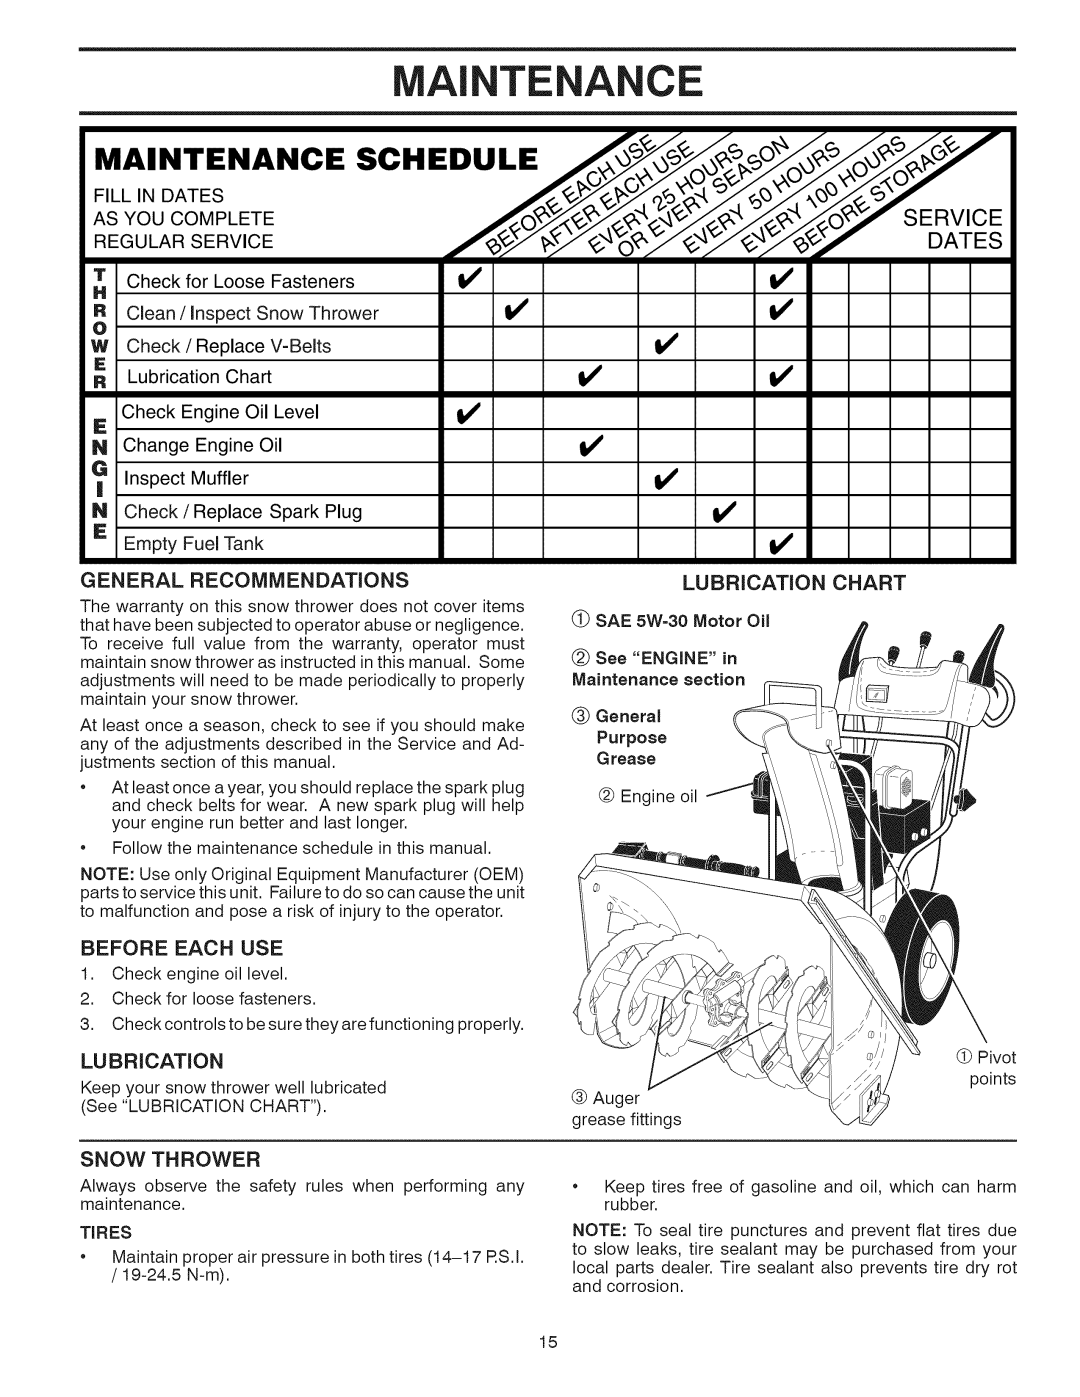 Craftsman 917.881064 owner manual E A Ce, Maintenance, General Recommendations, Before Each Use, Lubrication, Snow Thrower 